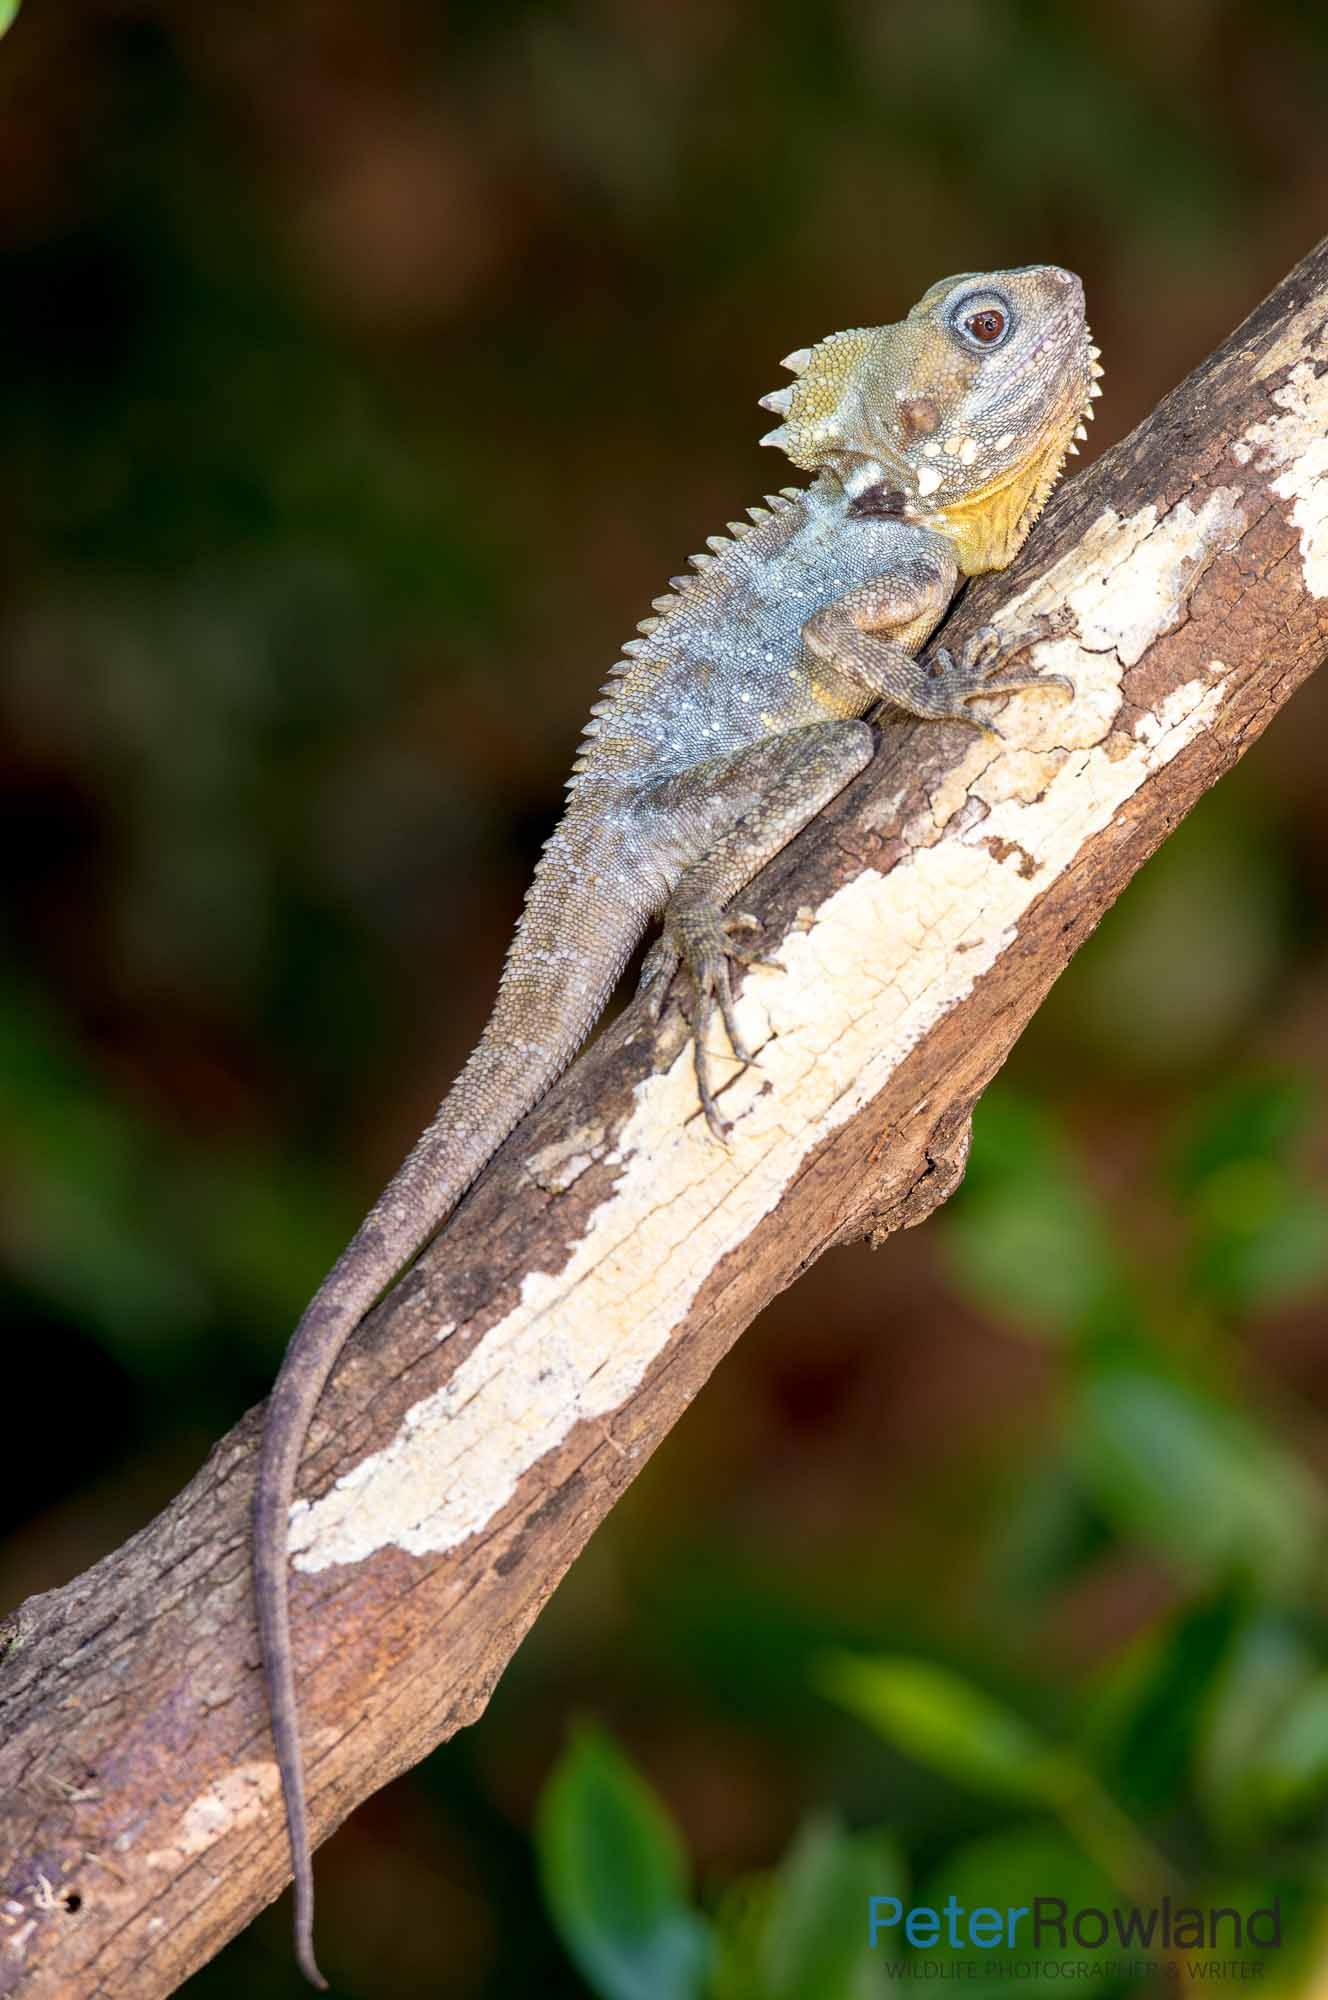 Boyd's Forest Dragon sitting on branch of tree with green leaves in background